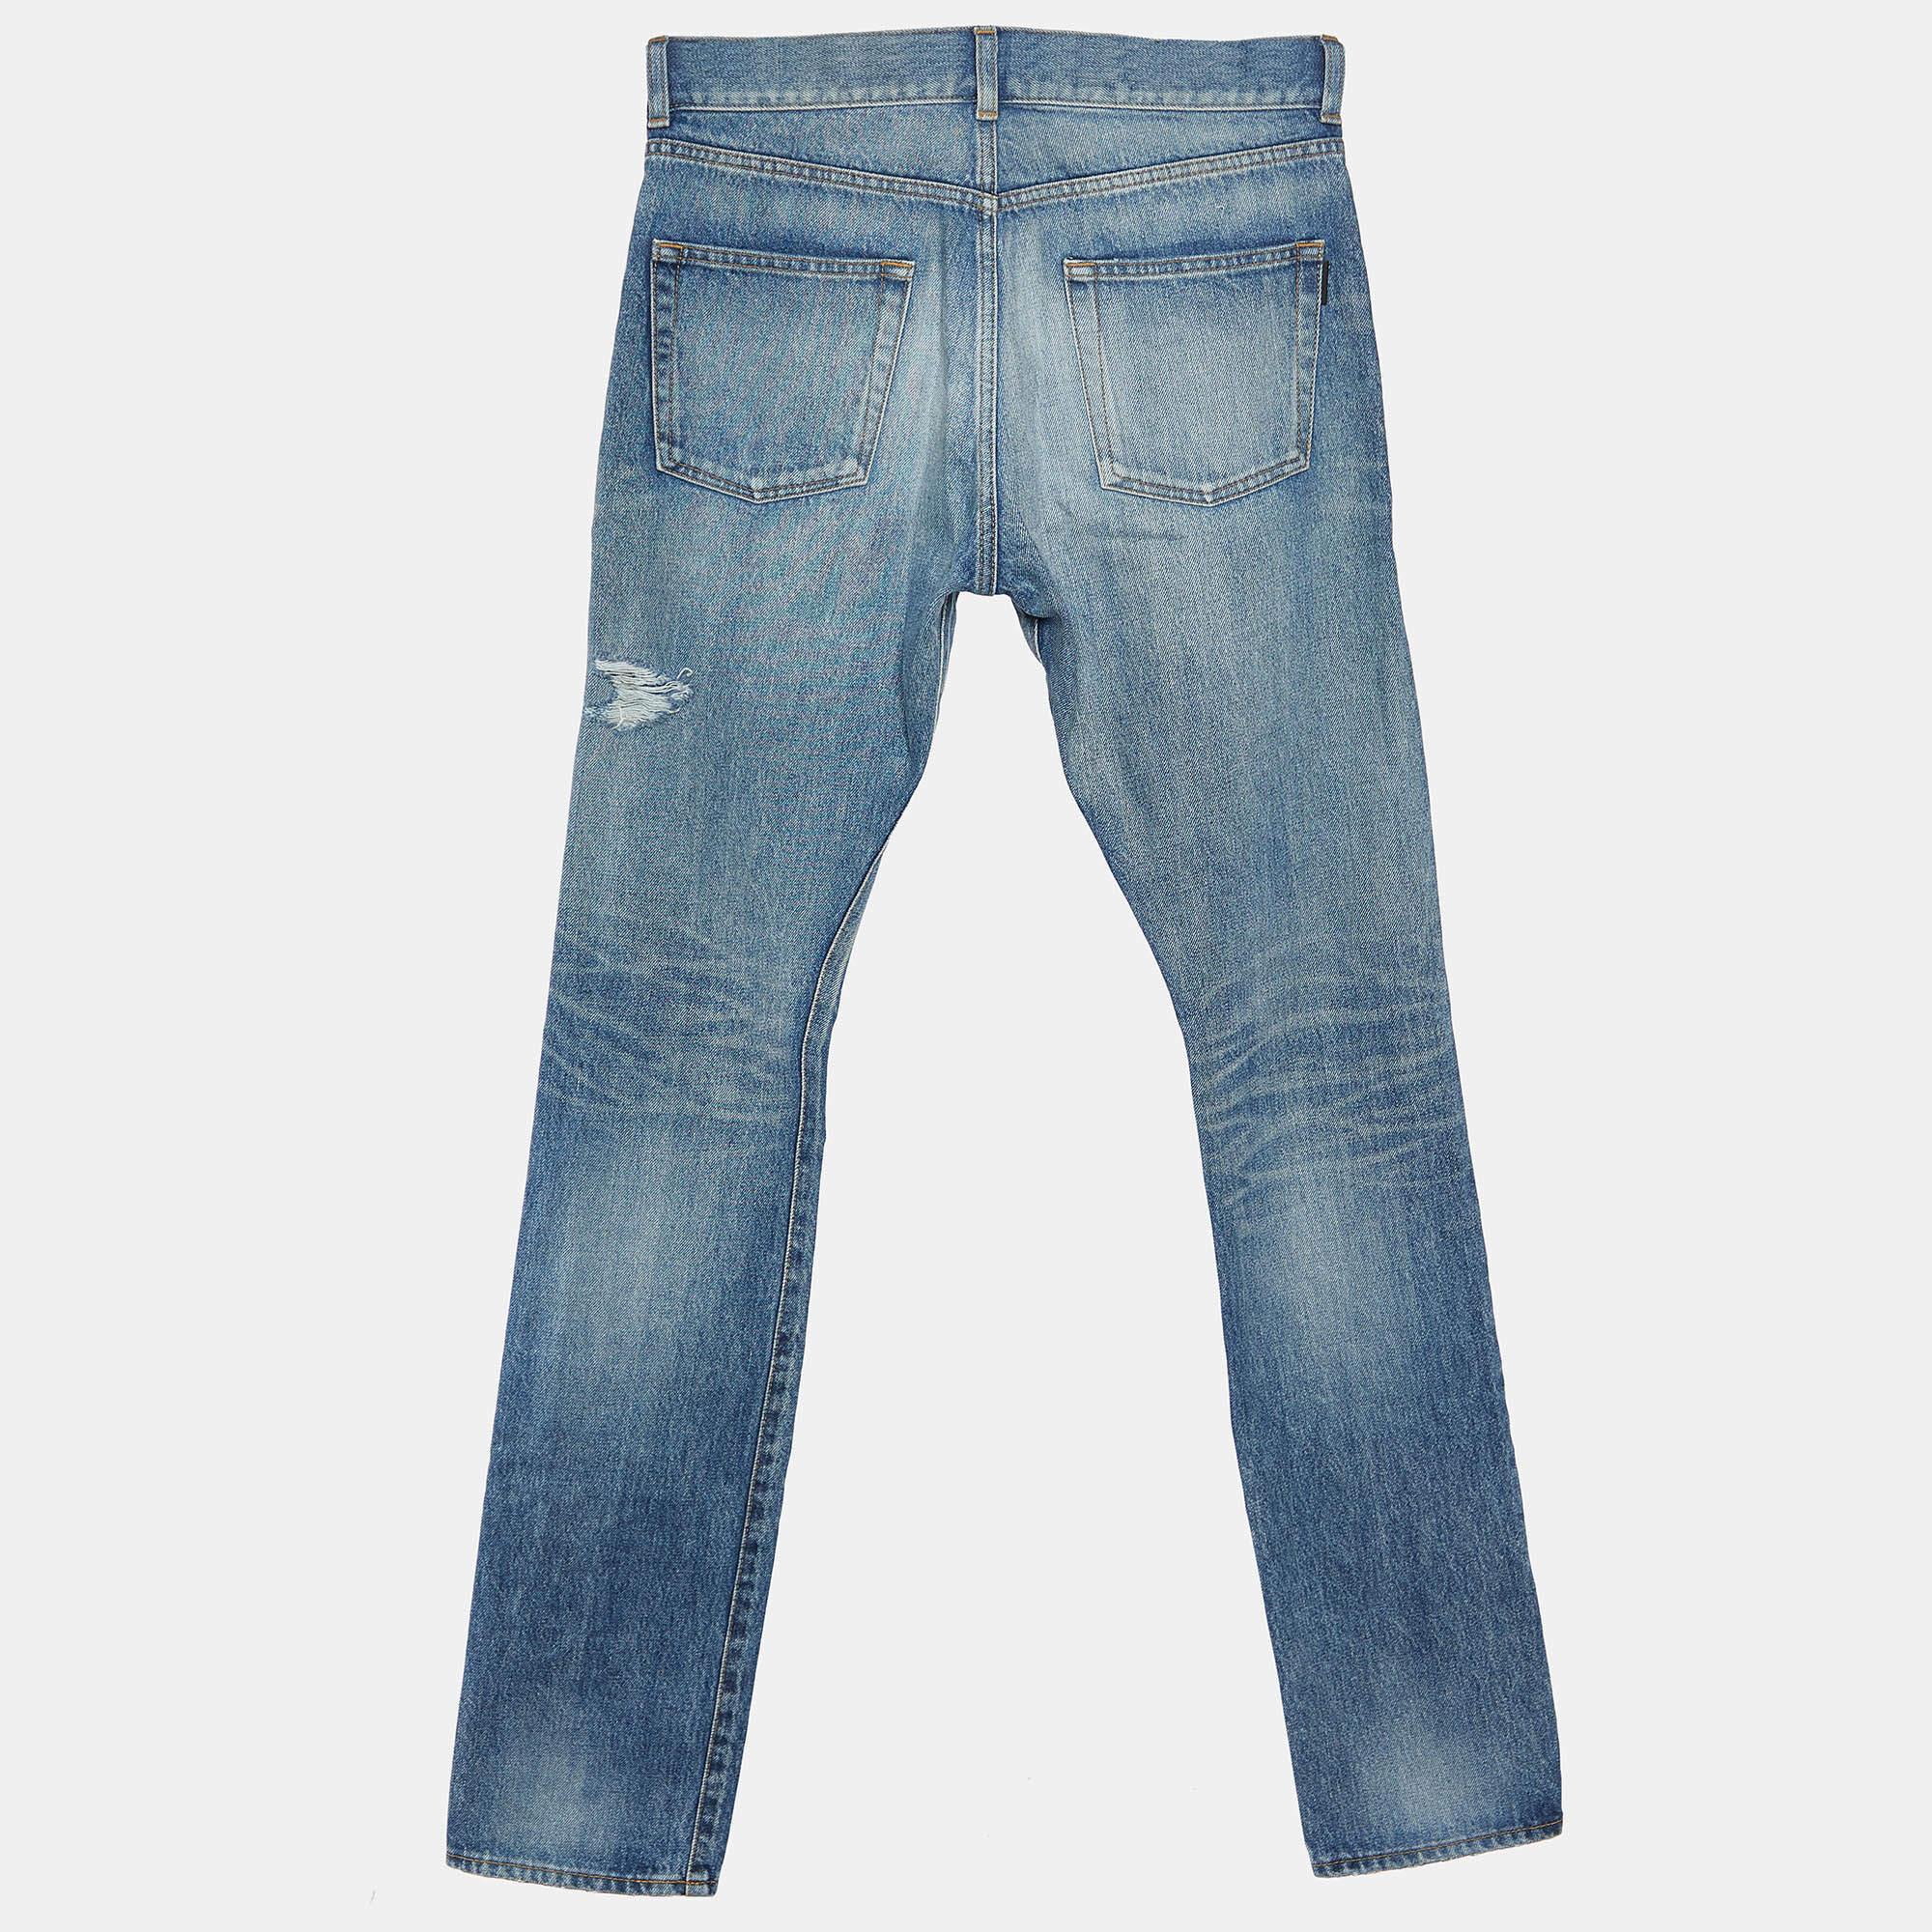 Pick these jeans from Saint Laurent and feel absolutely stylish. They have been skillfully stitched using high-quality fabric and flaunt a superb fit. Pair these jeans with your favorite sneakers as you head out for the day.

